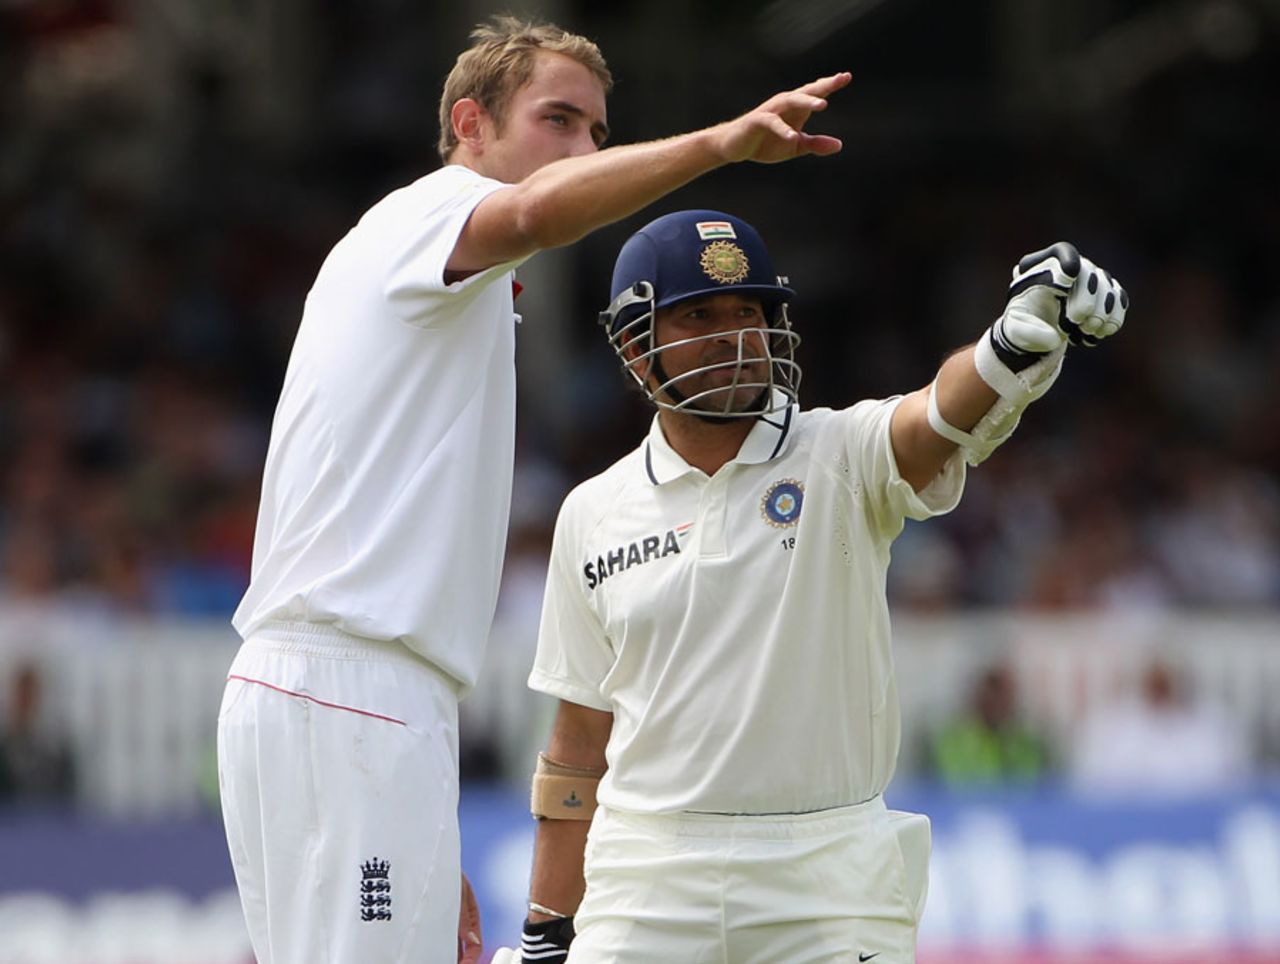 Stuart Broad and Sachin Tendulkar point towards the stands, England v India, 1st Test, Lord's, 5th day, July 25, 2011